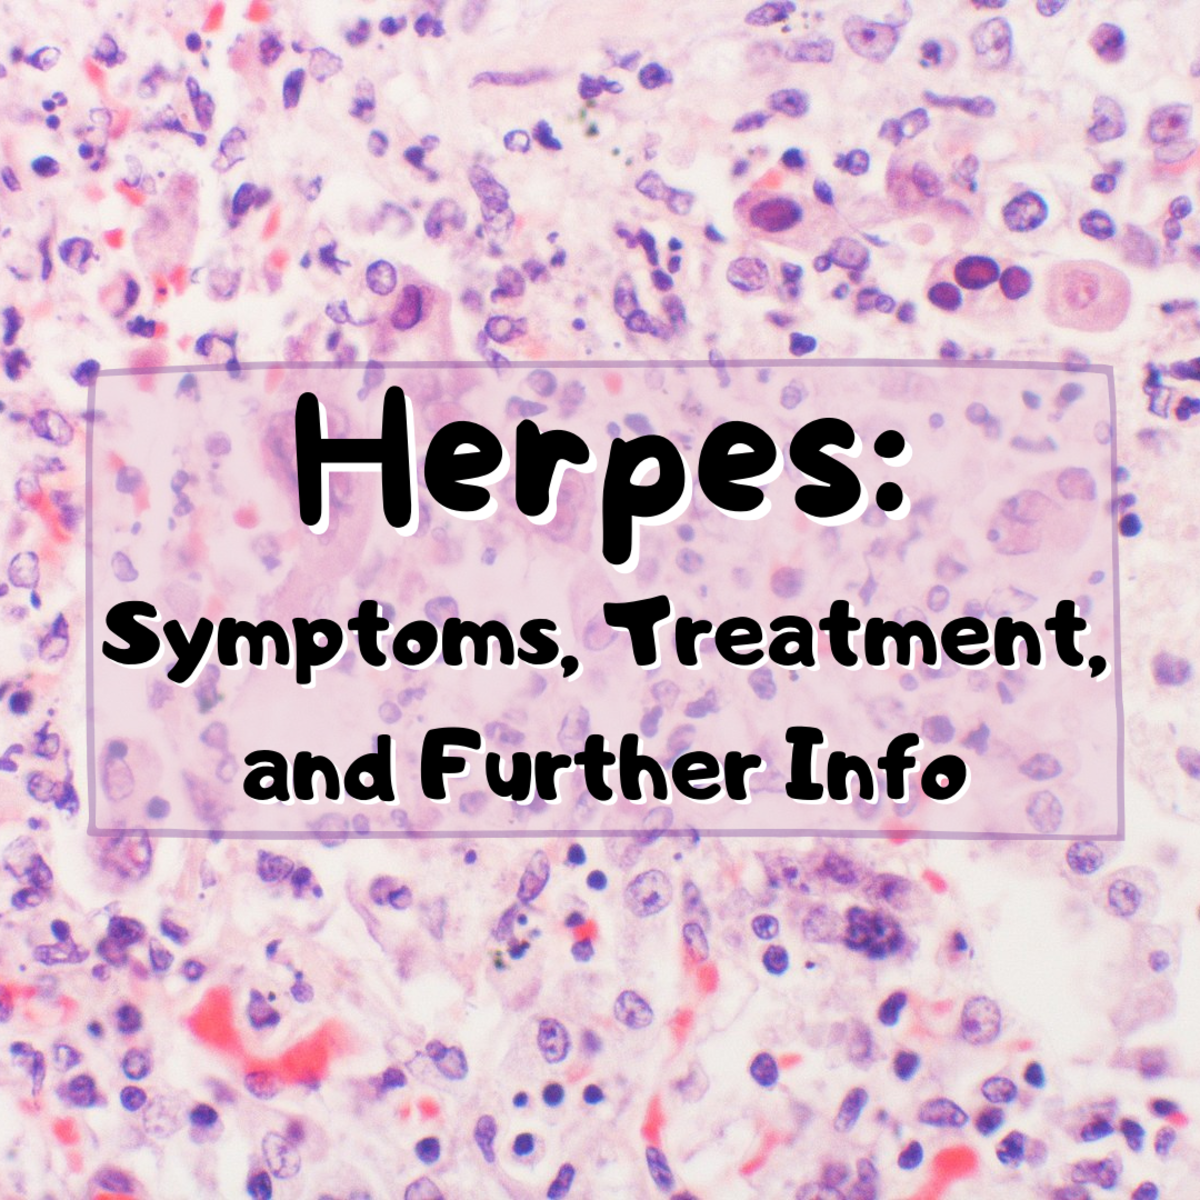 This article discusses herpes, a common disease present in a large portion of the population. Read on to learn about what herpes is, its symptoms, and the available treatment options.